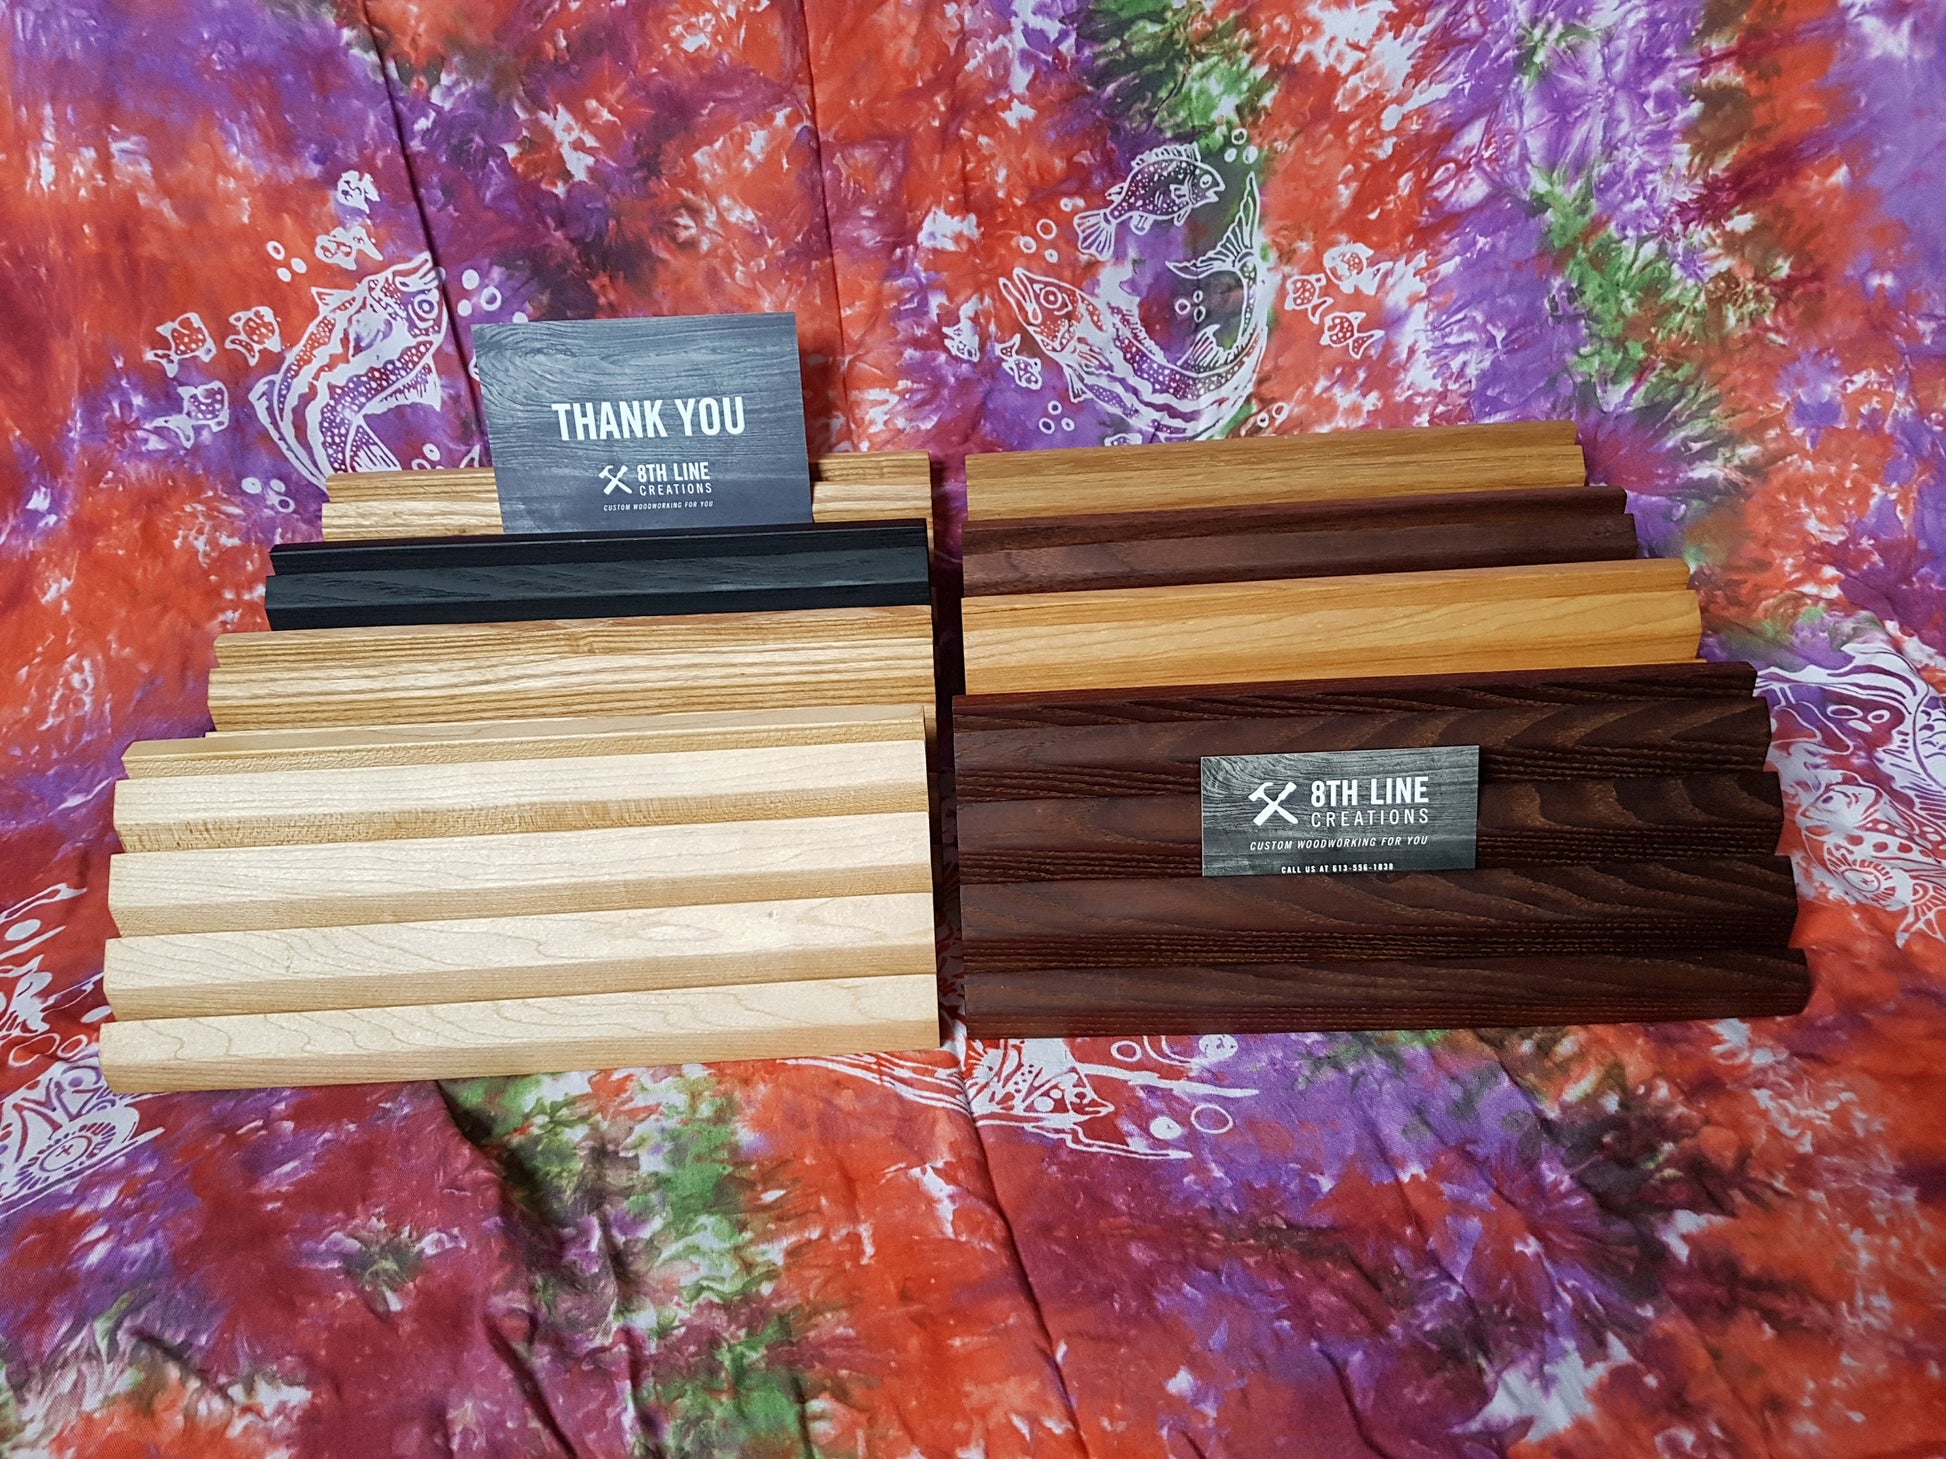 Printed Cherry Wooden Business Card Holder